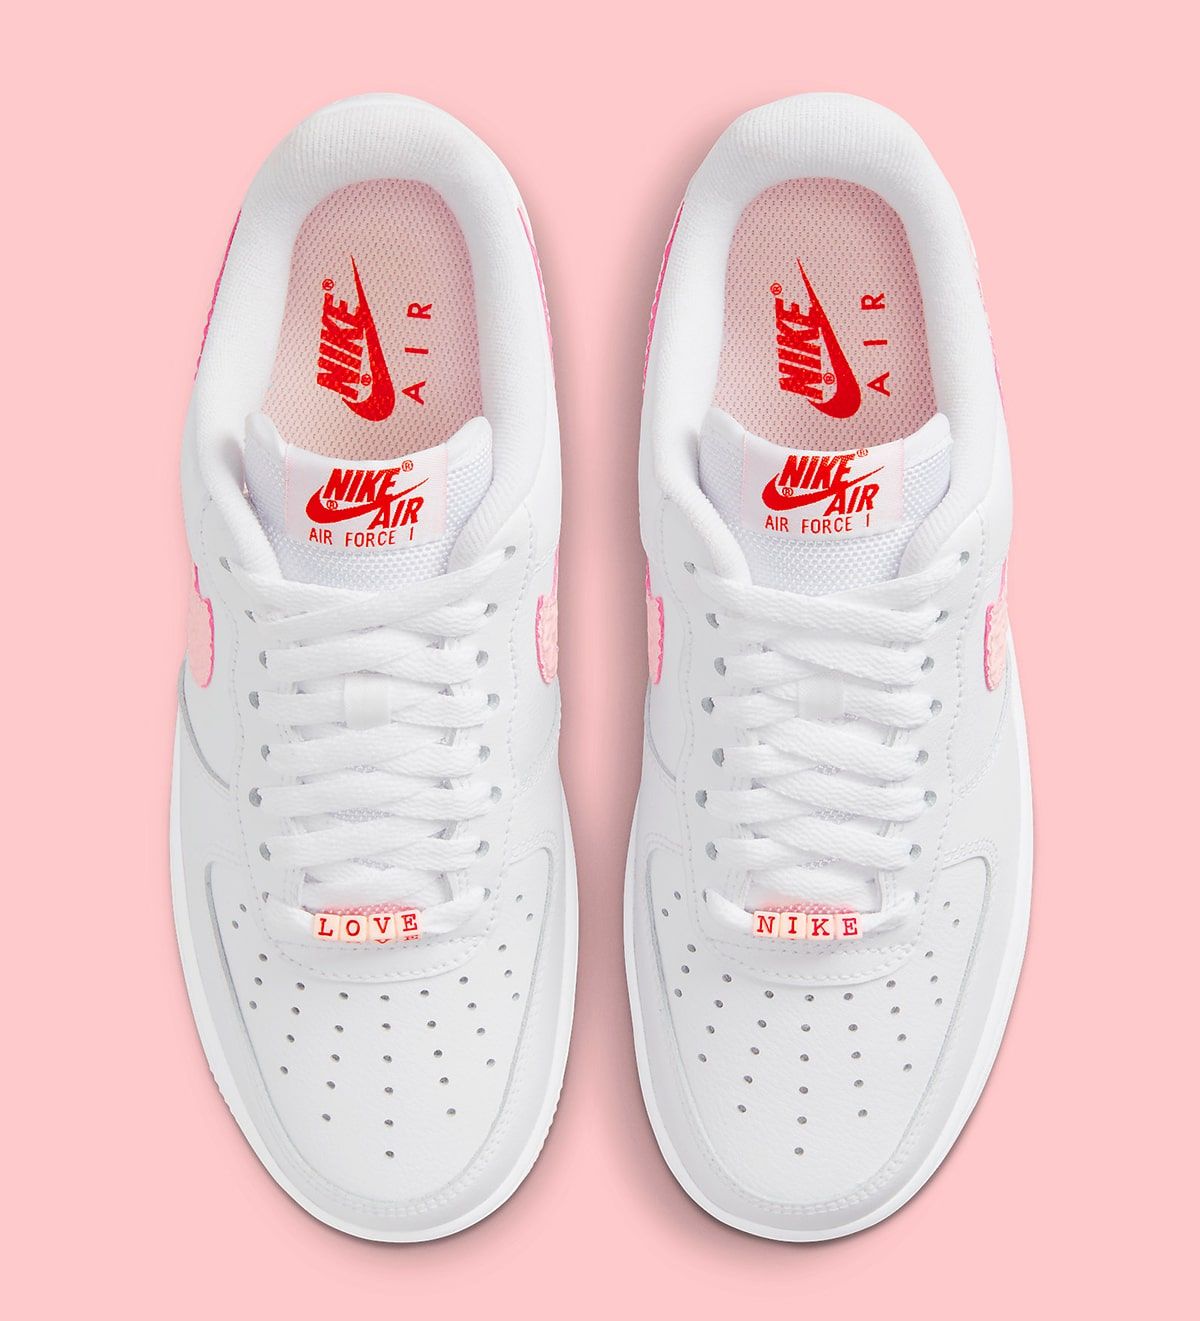 equation coach Patronize New Looks // Nike Air Force 1 "Valentine's Day" 2022 | HOUSE OF HEAT